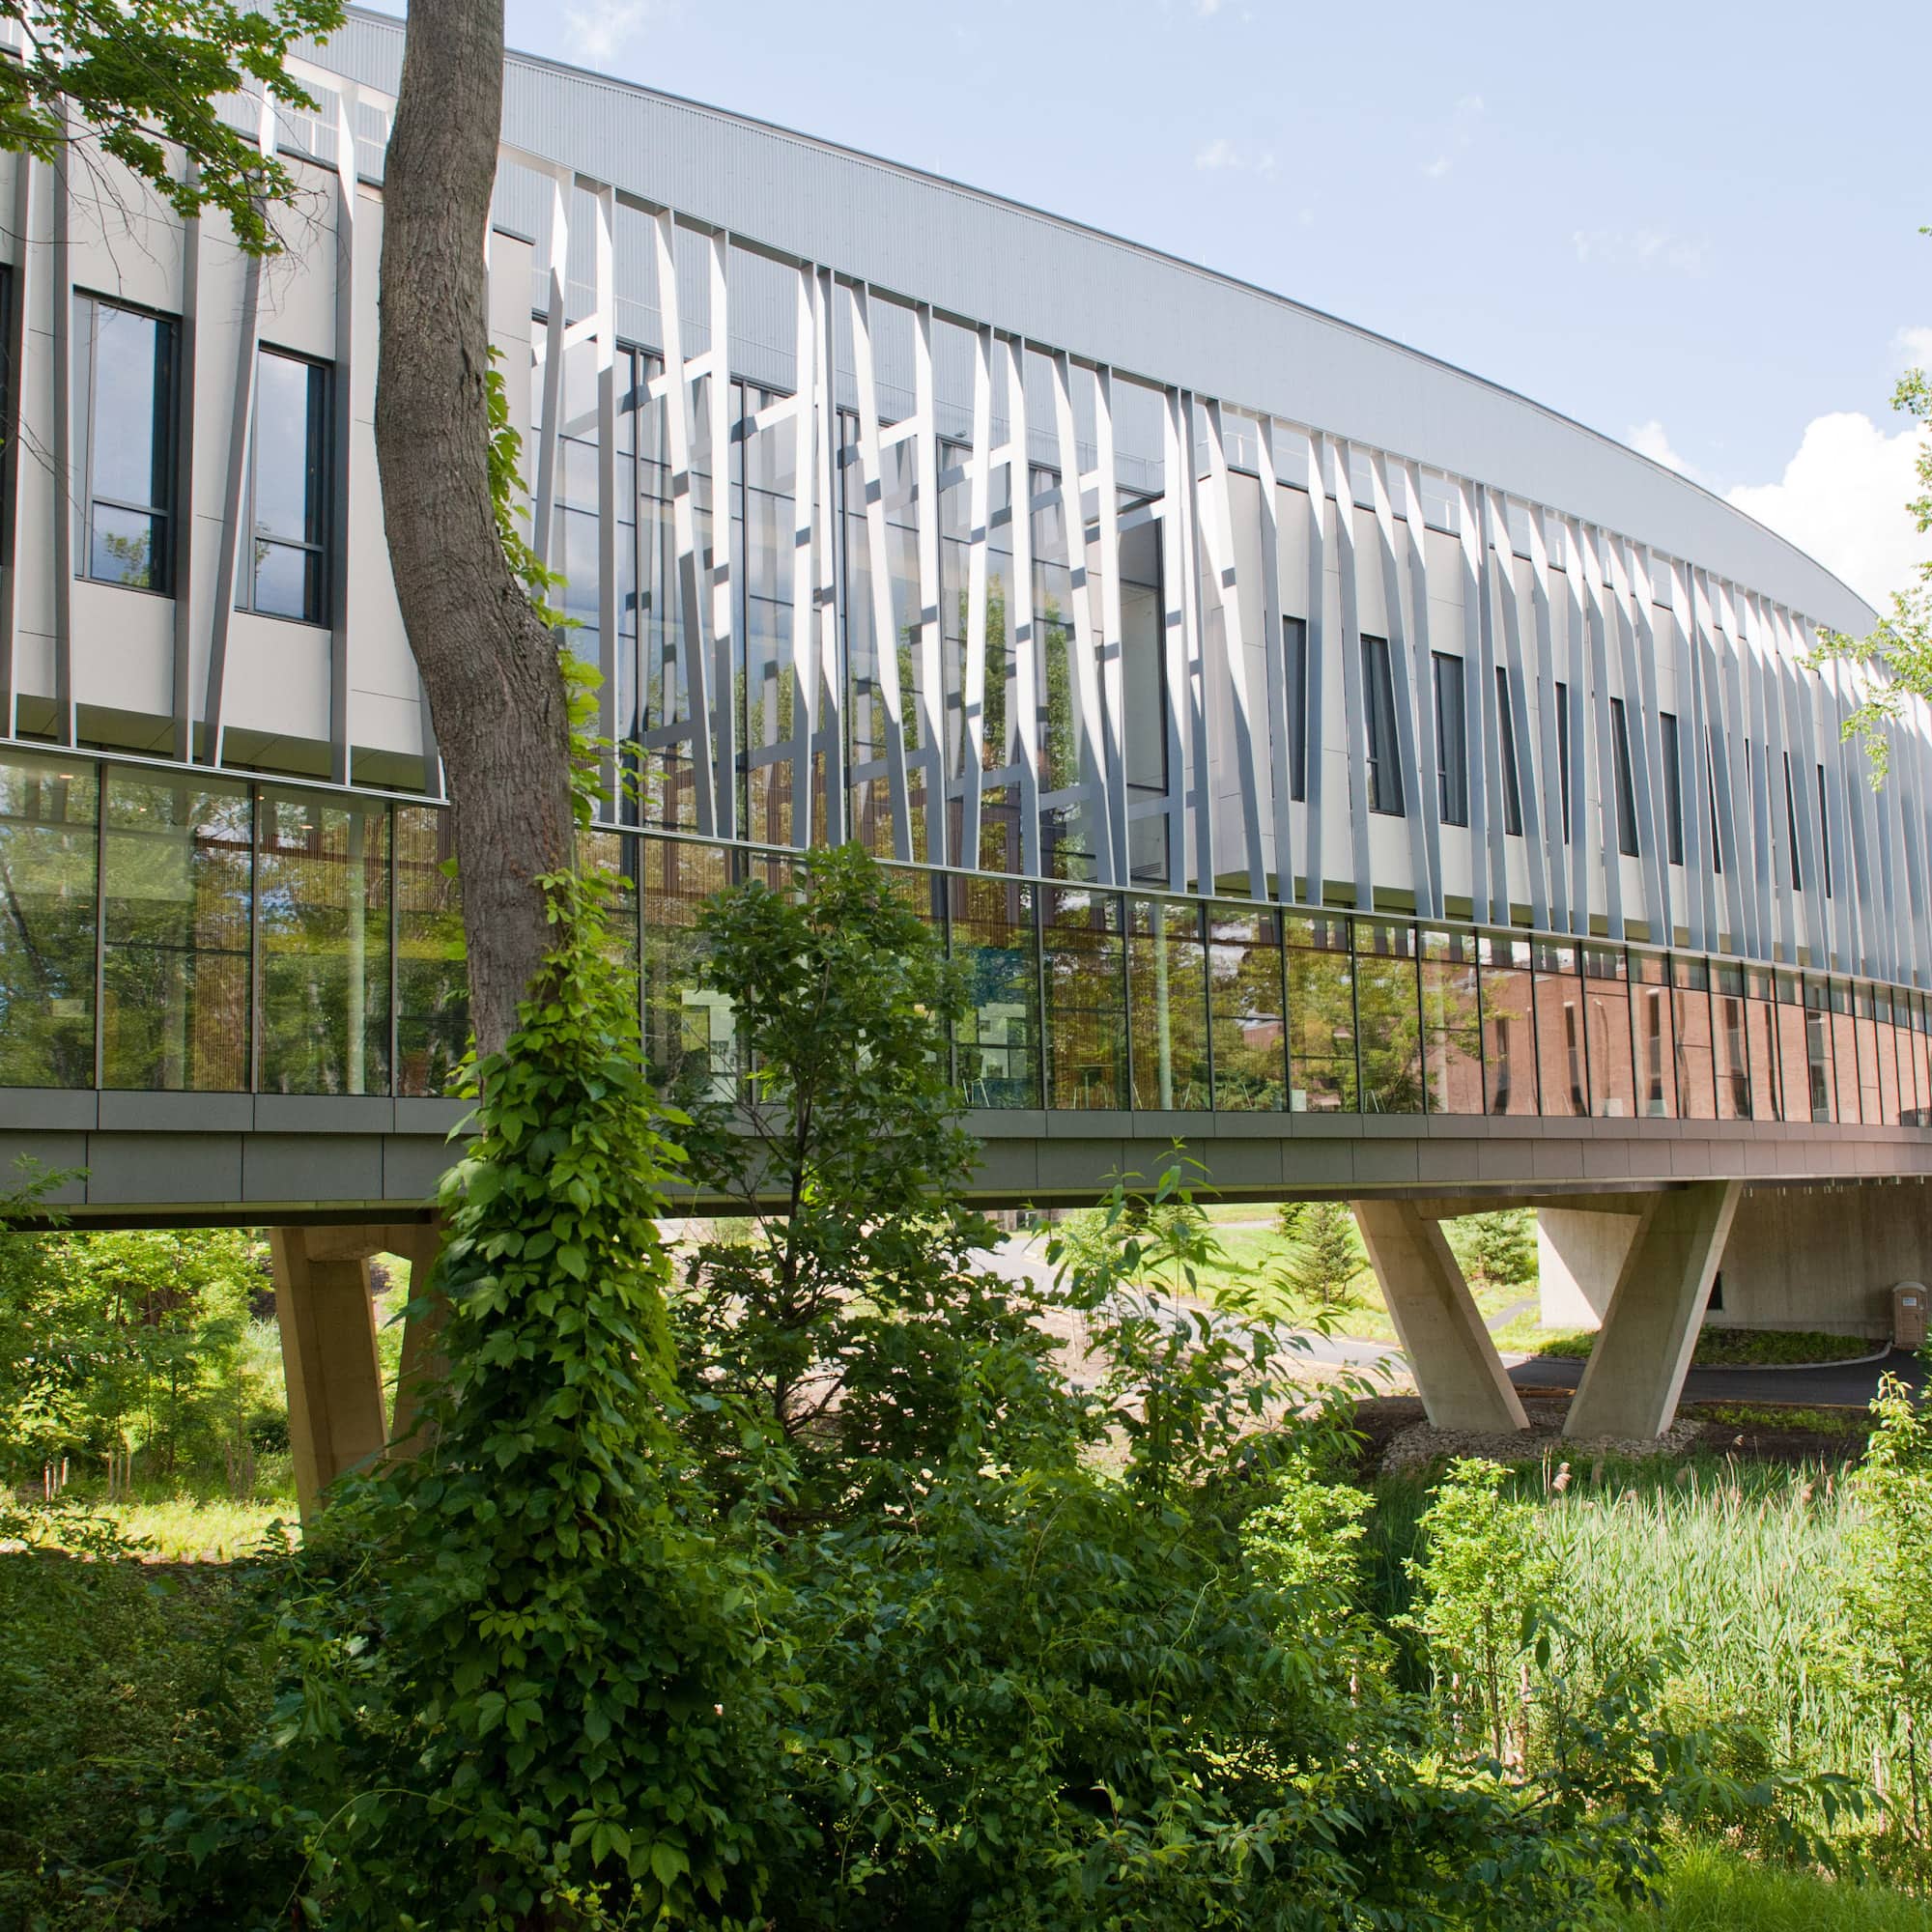 The Bridge for Laboratory Sciences, a large long building with huge windows standing elevated on angled pillars over greenery on the Vassar campus.